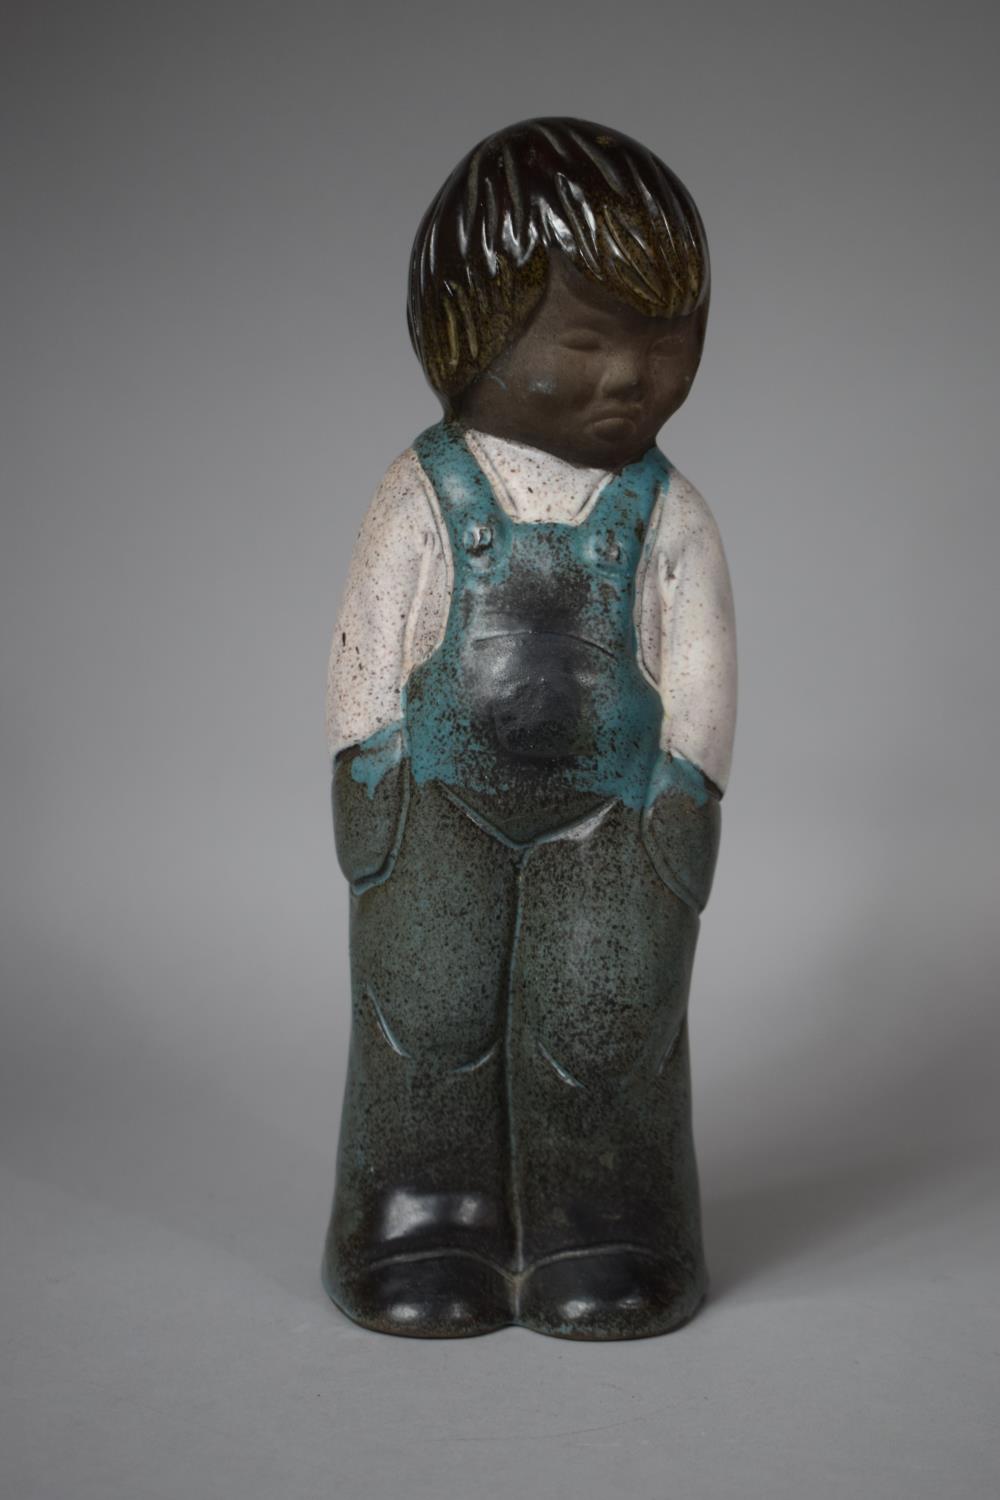 An Irish Glazed Stoneware Figure of a Child in Dungarees, 29.5cm high